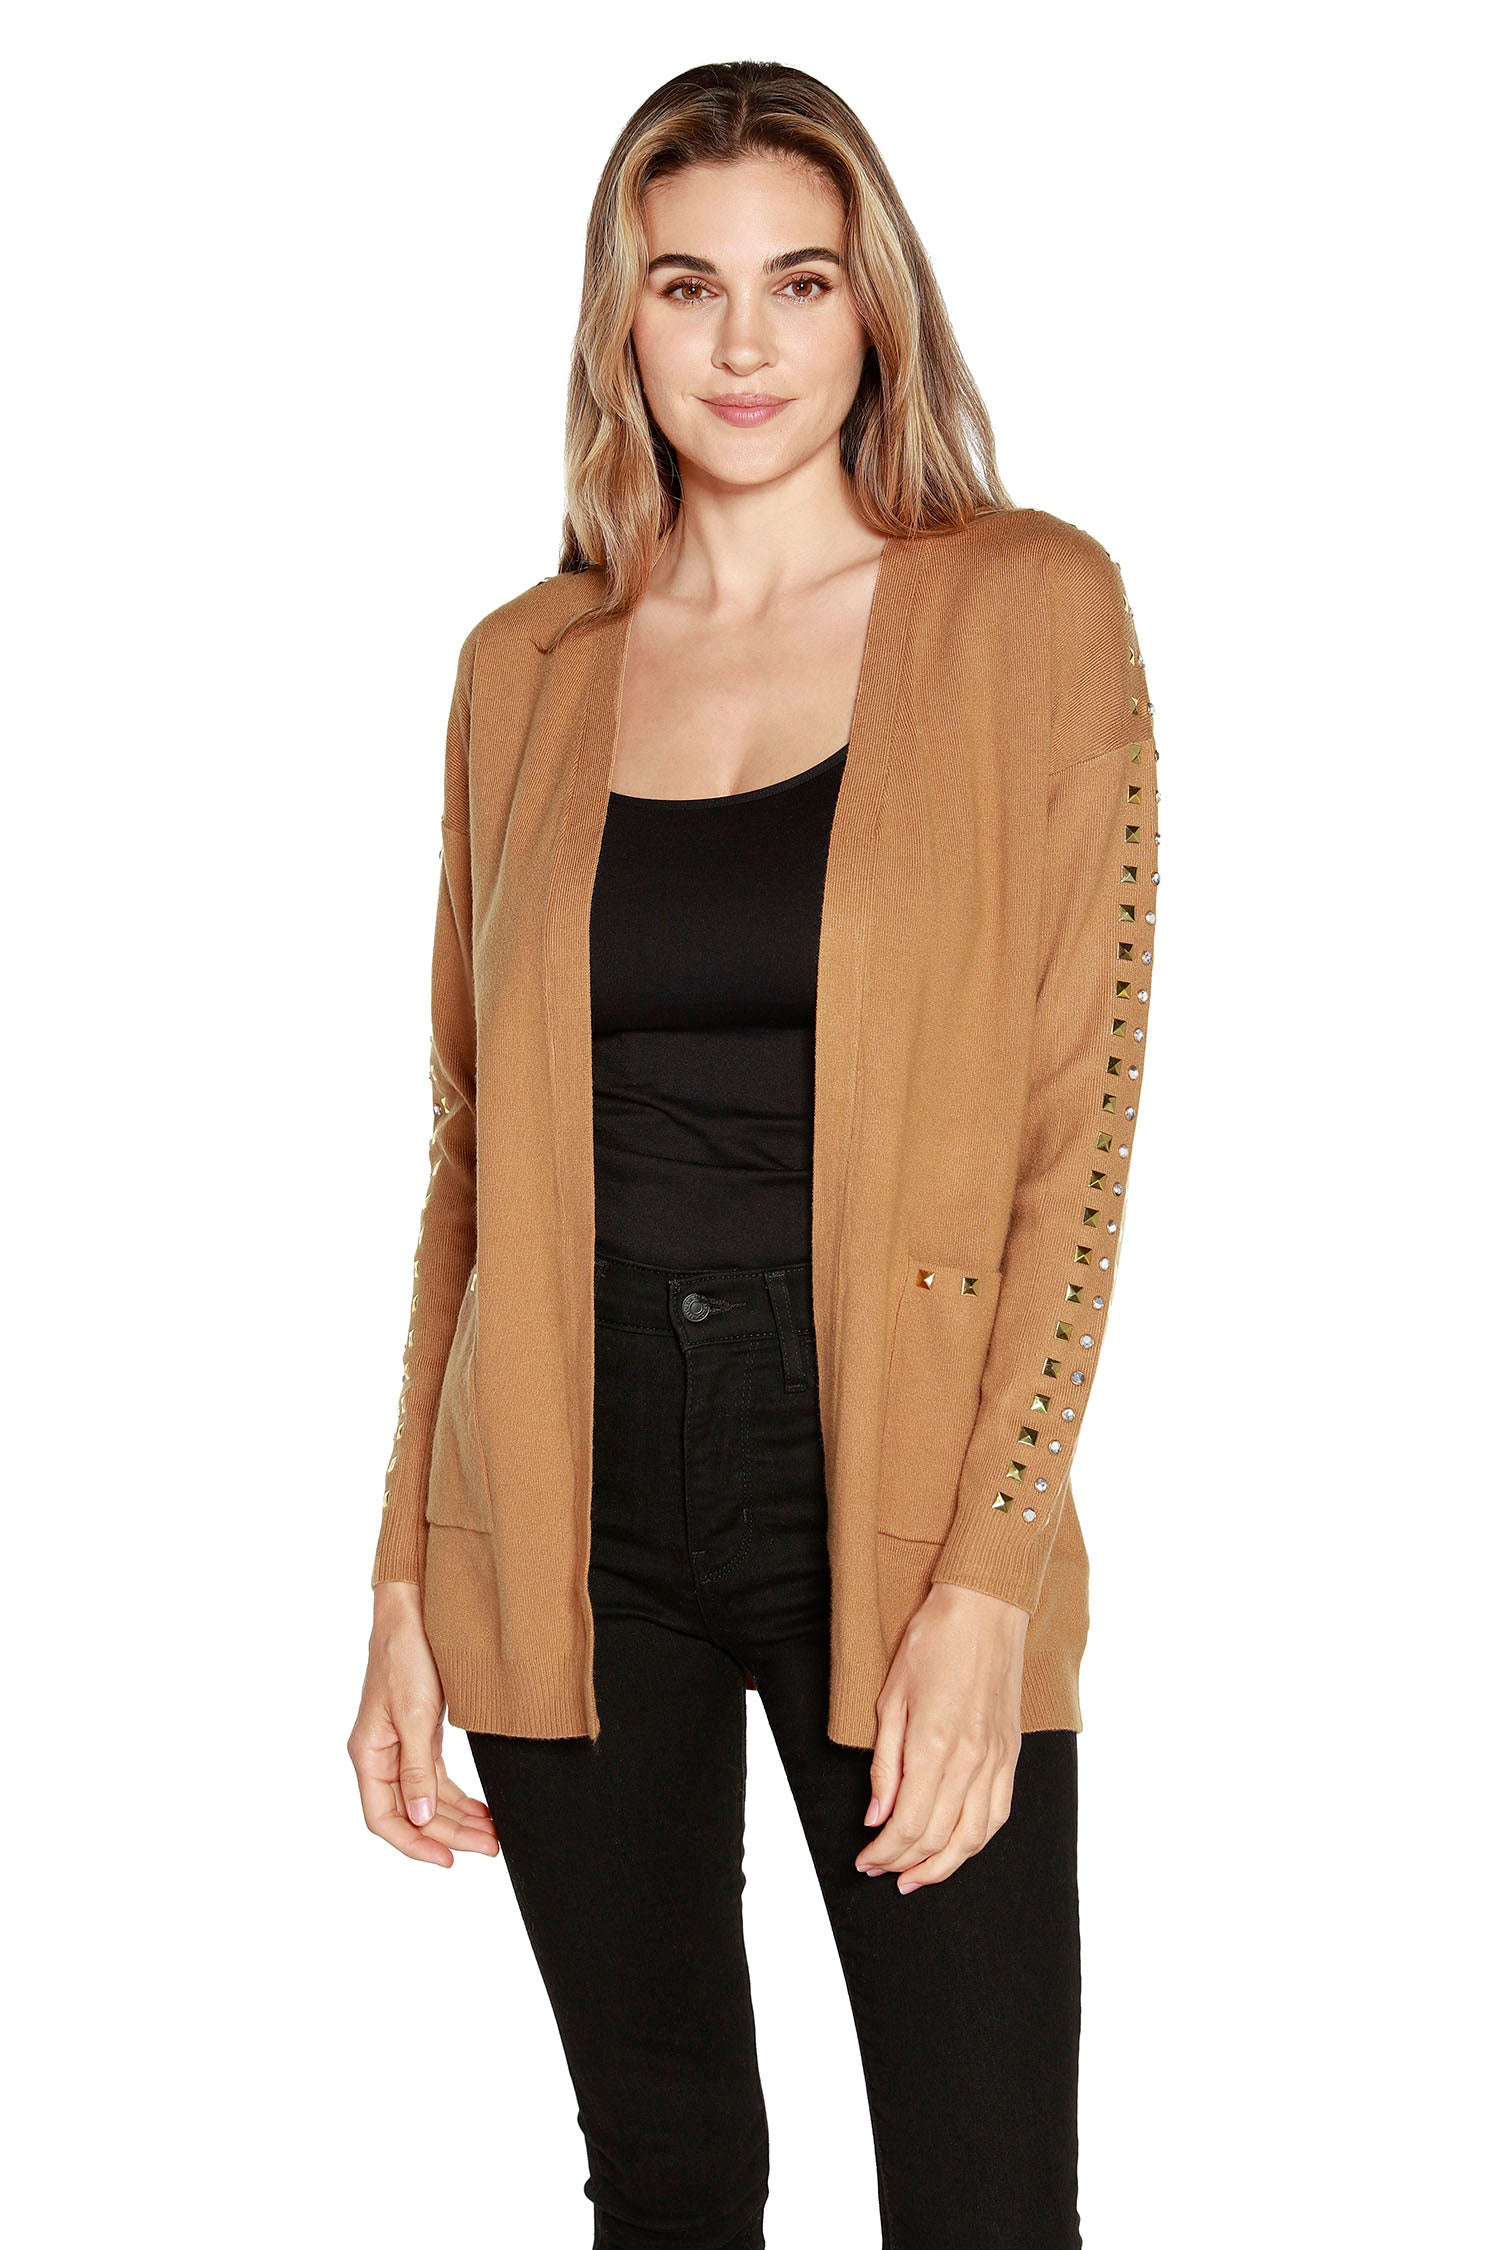 Women’s Lightweight Open Front Cardigan with Rhinestones, Studs and Patch Pockets